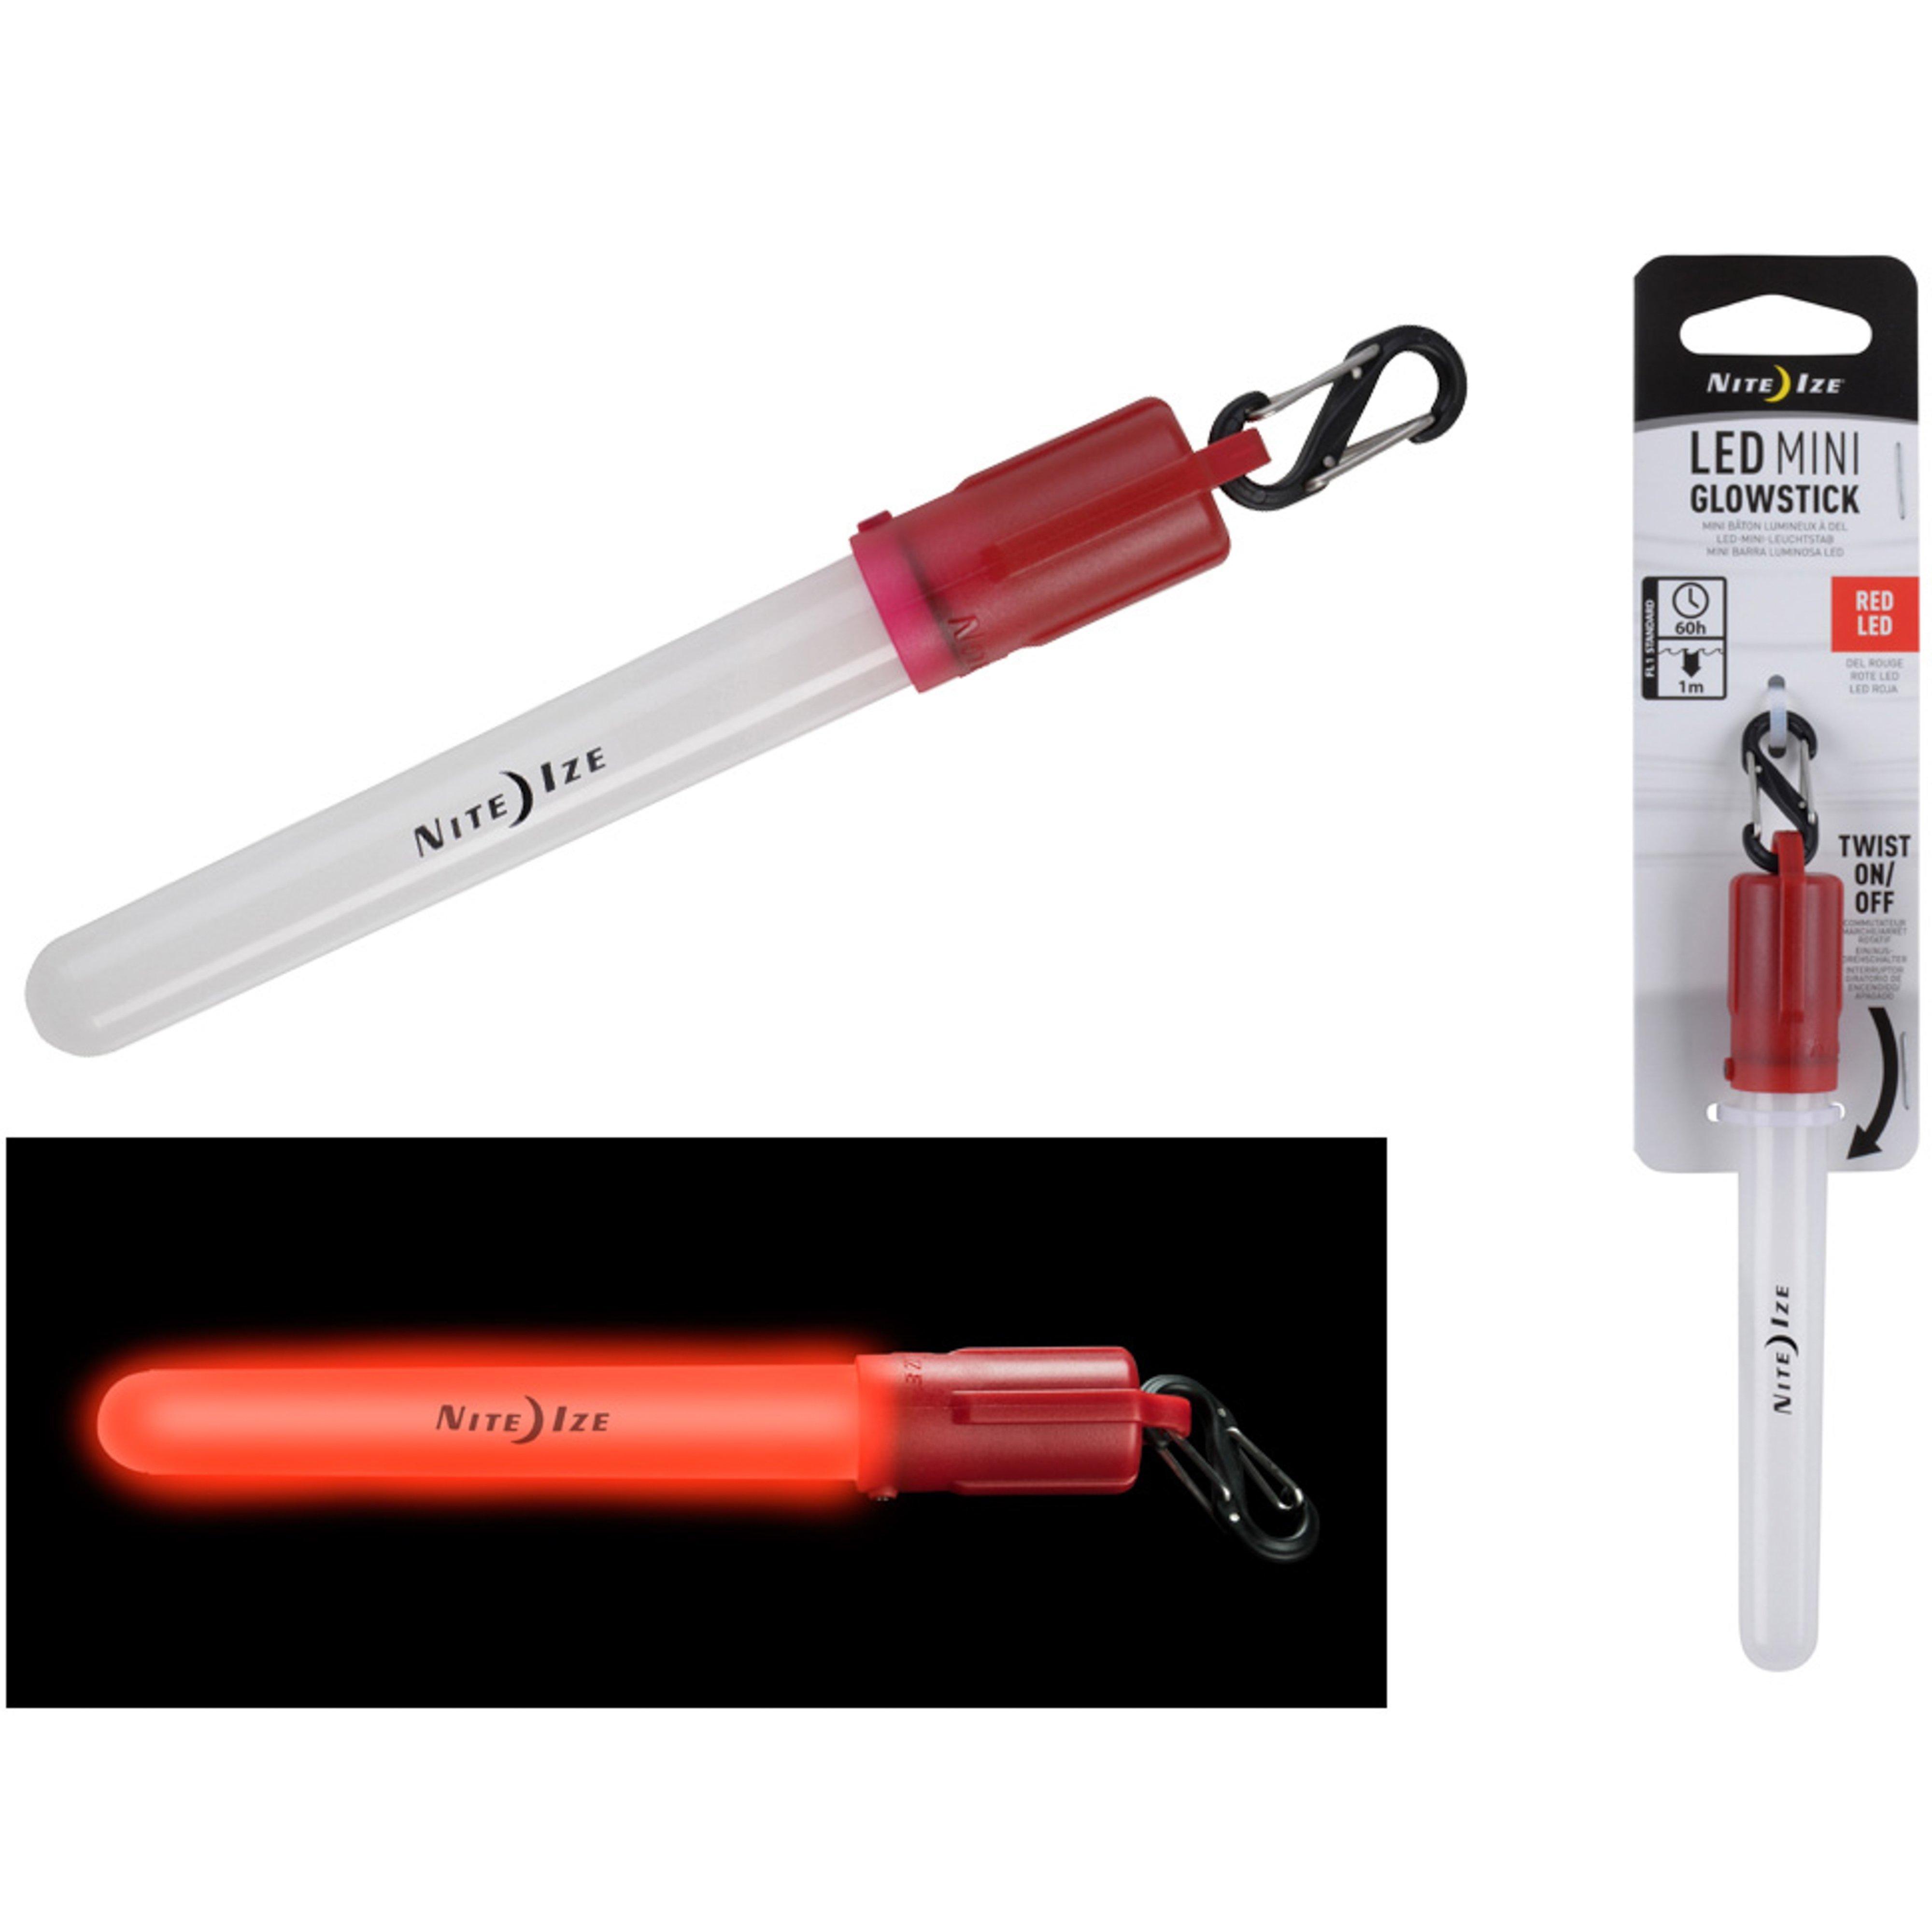 Niteize LED Mini Glowstick (Red) Review